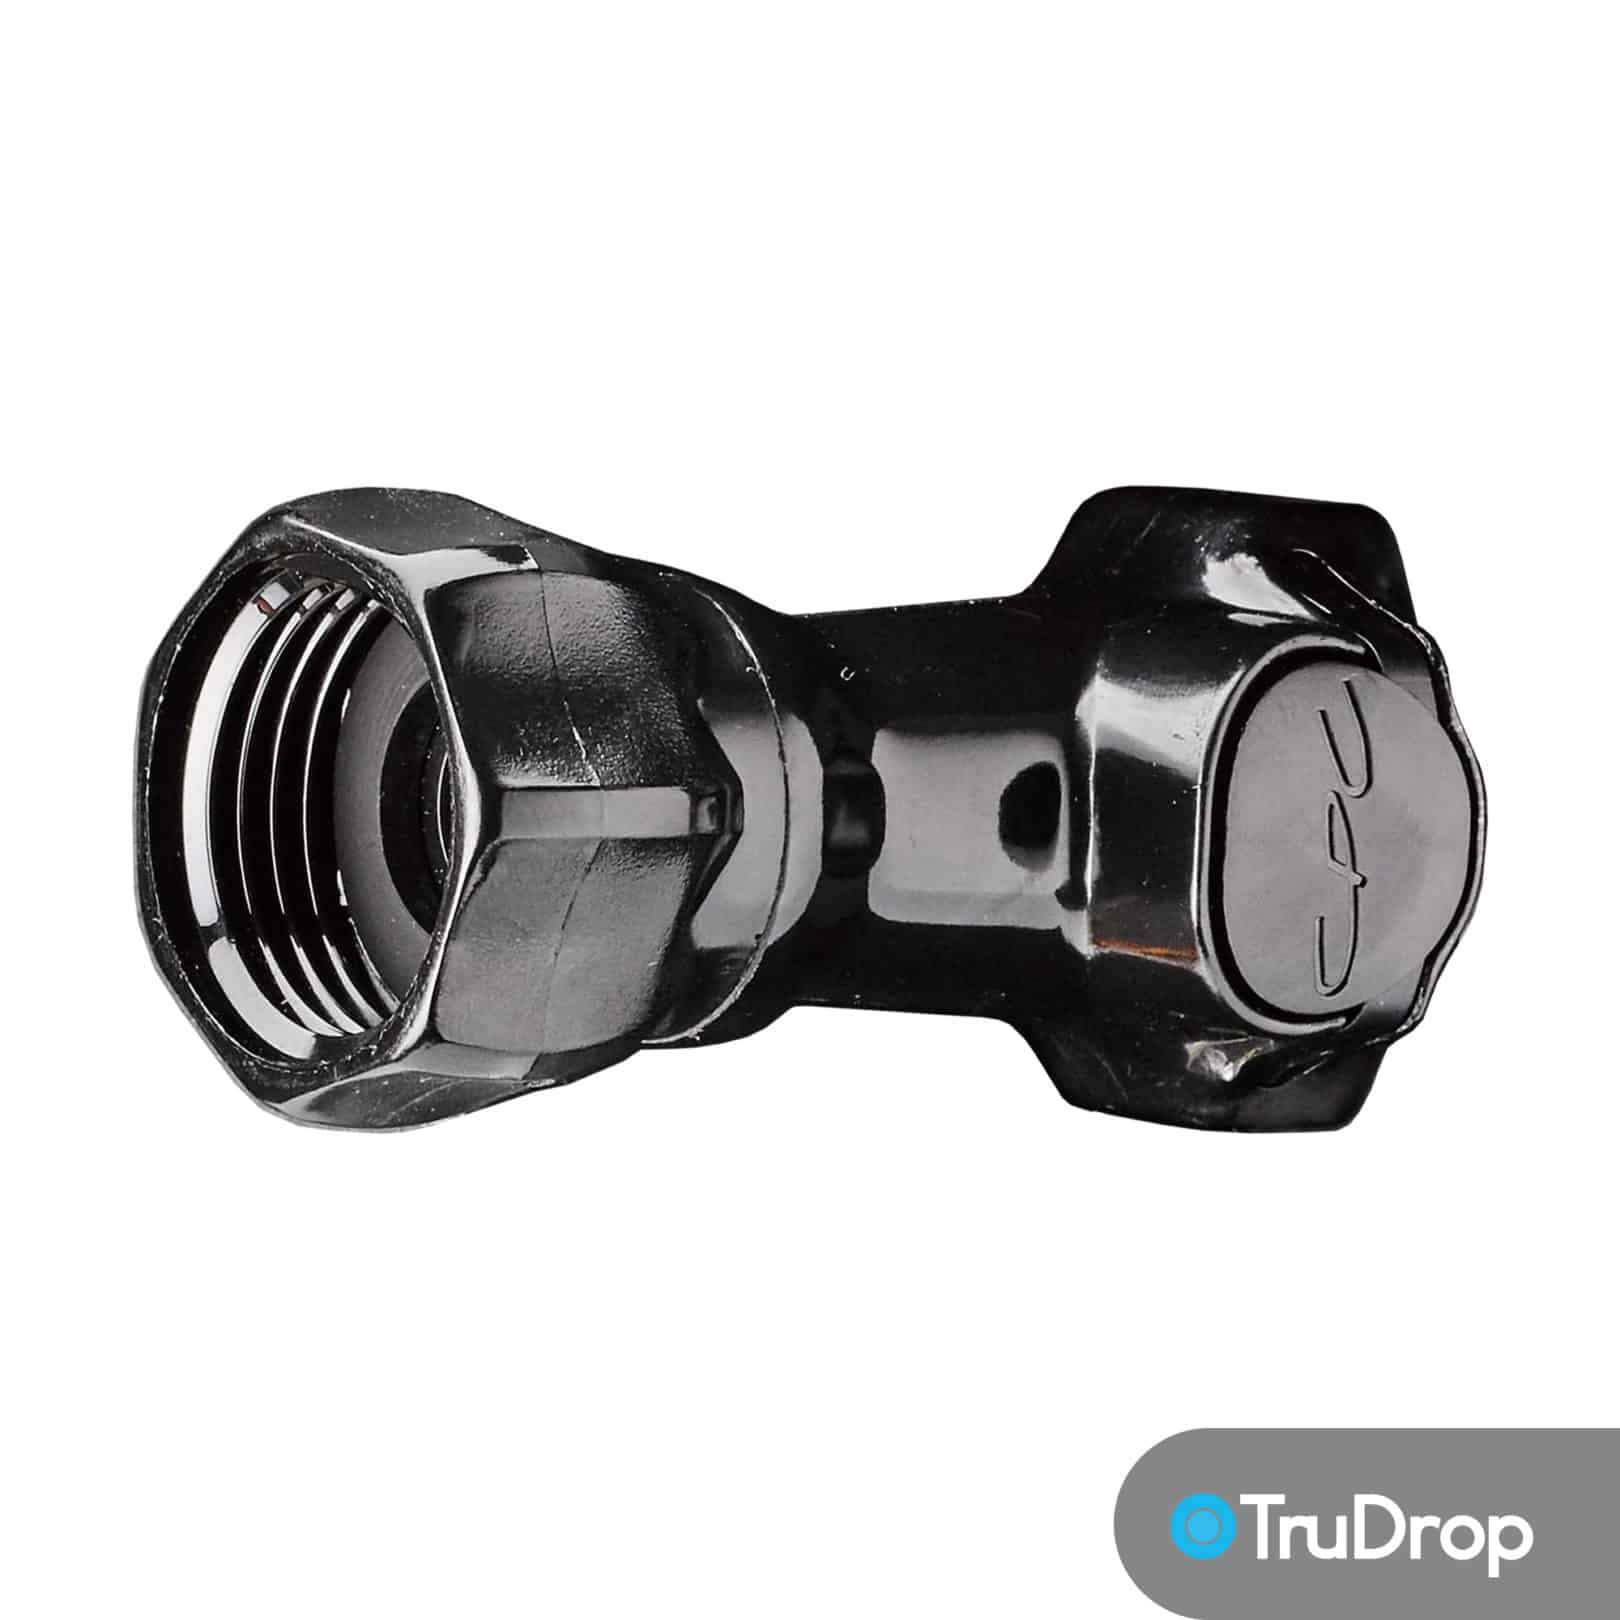 trudrop easy drain system coupler for easy drain